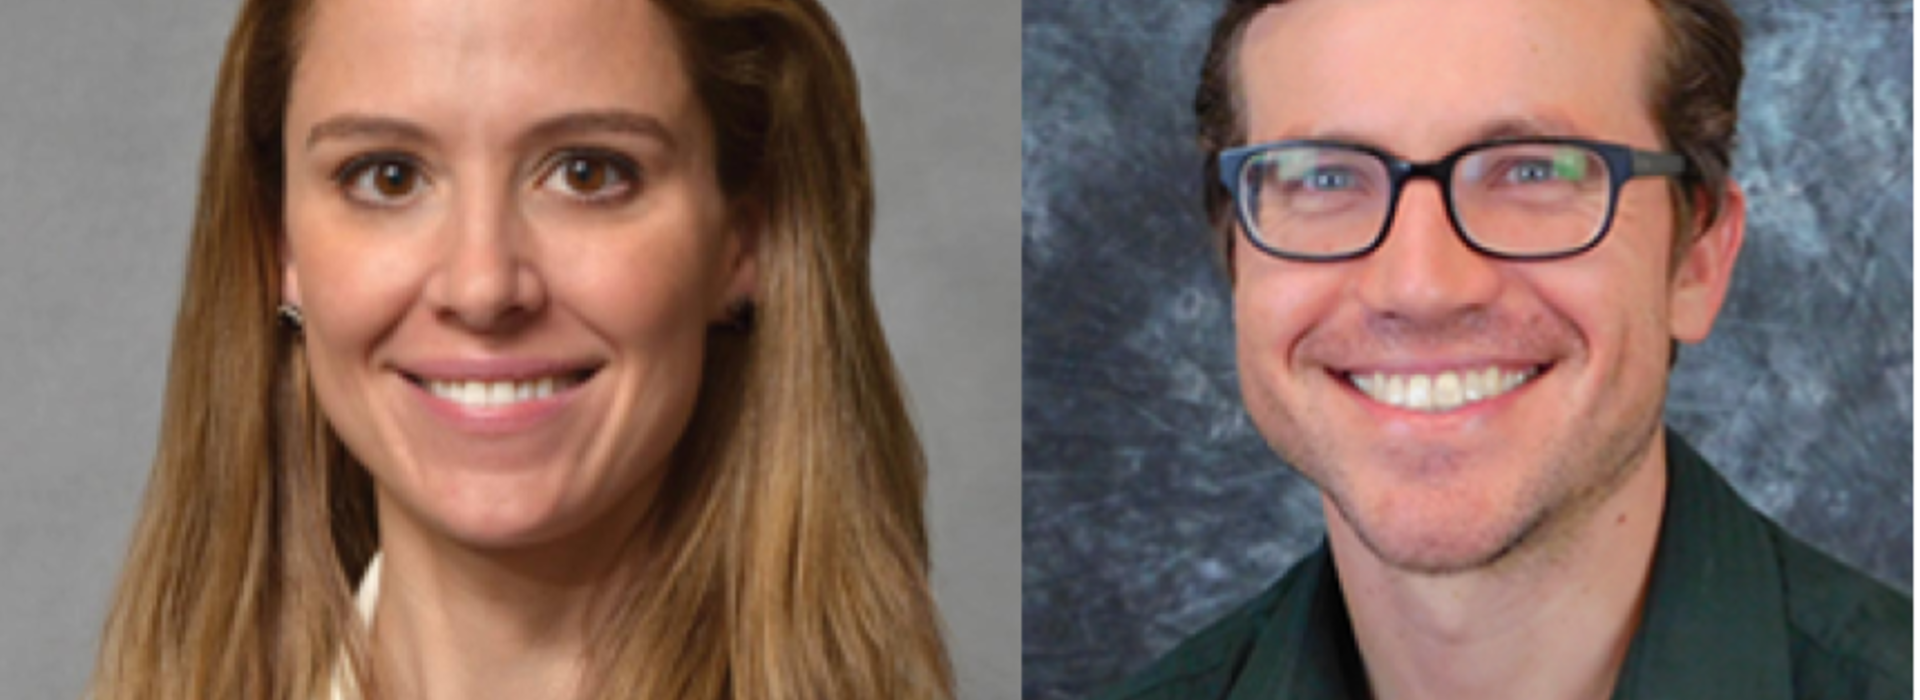 Two headshots of physicians smiling. On the left is Bronwyn Southwell, a young woman. On the right is Zach Kaltenborn, a young man with glasses.